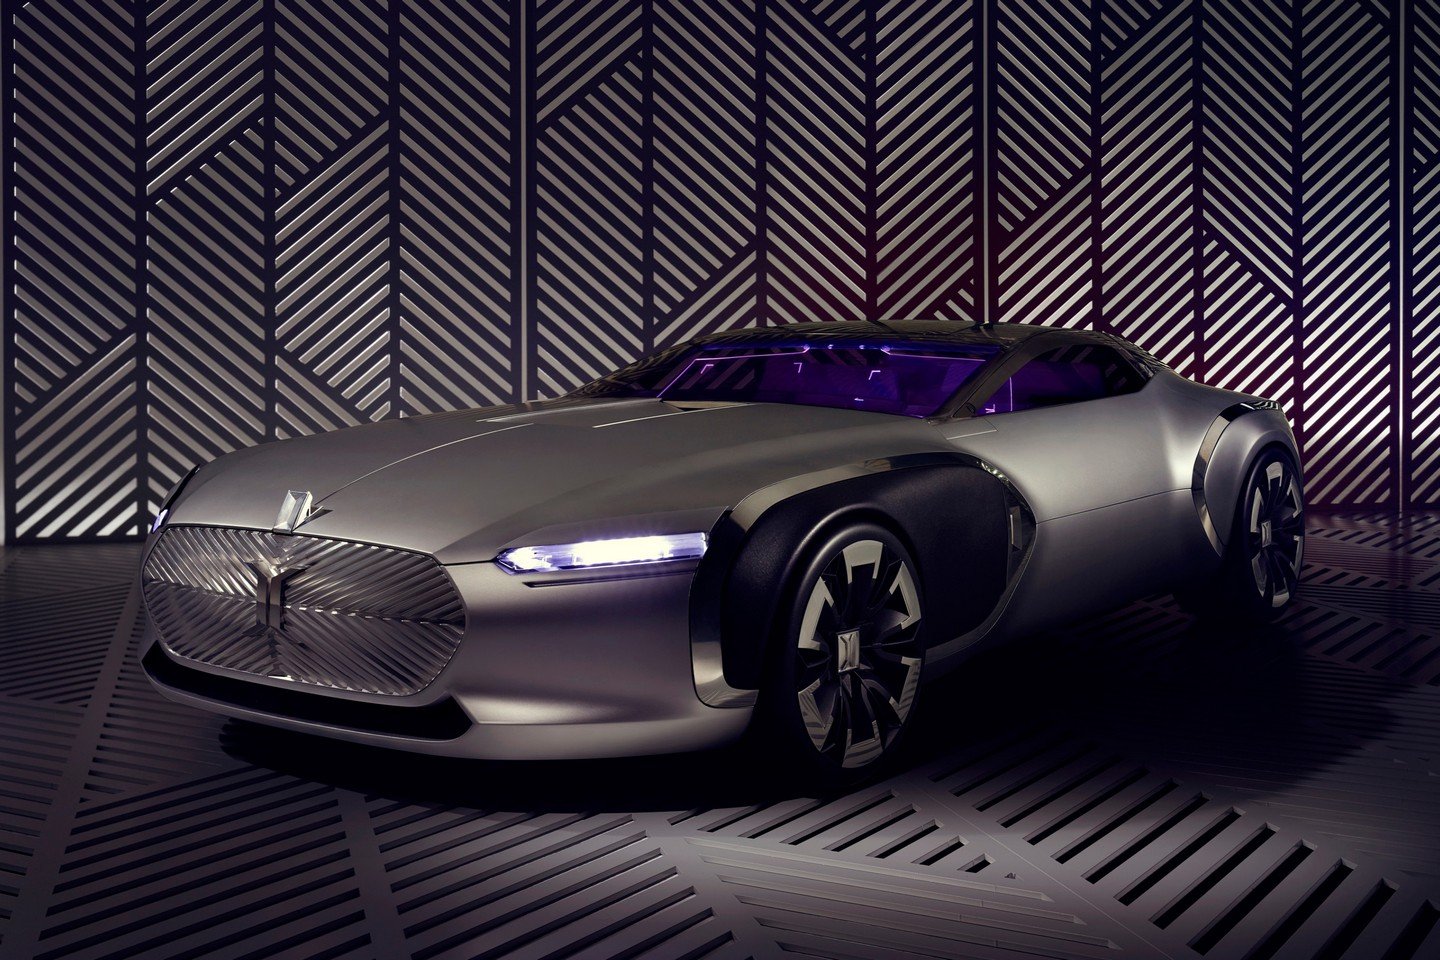 renault, Coupe, Corbusier, Concept, Breaks, Cover, Cars, 2015 Wallpaper